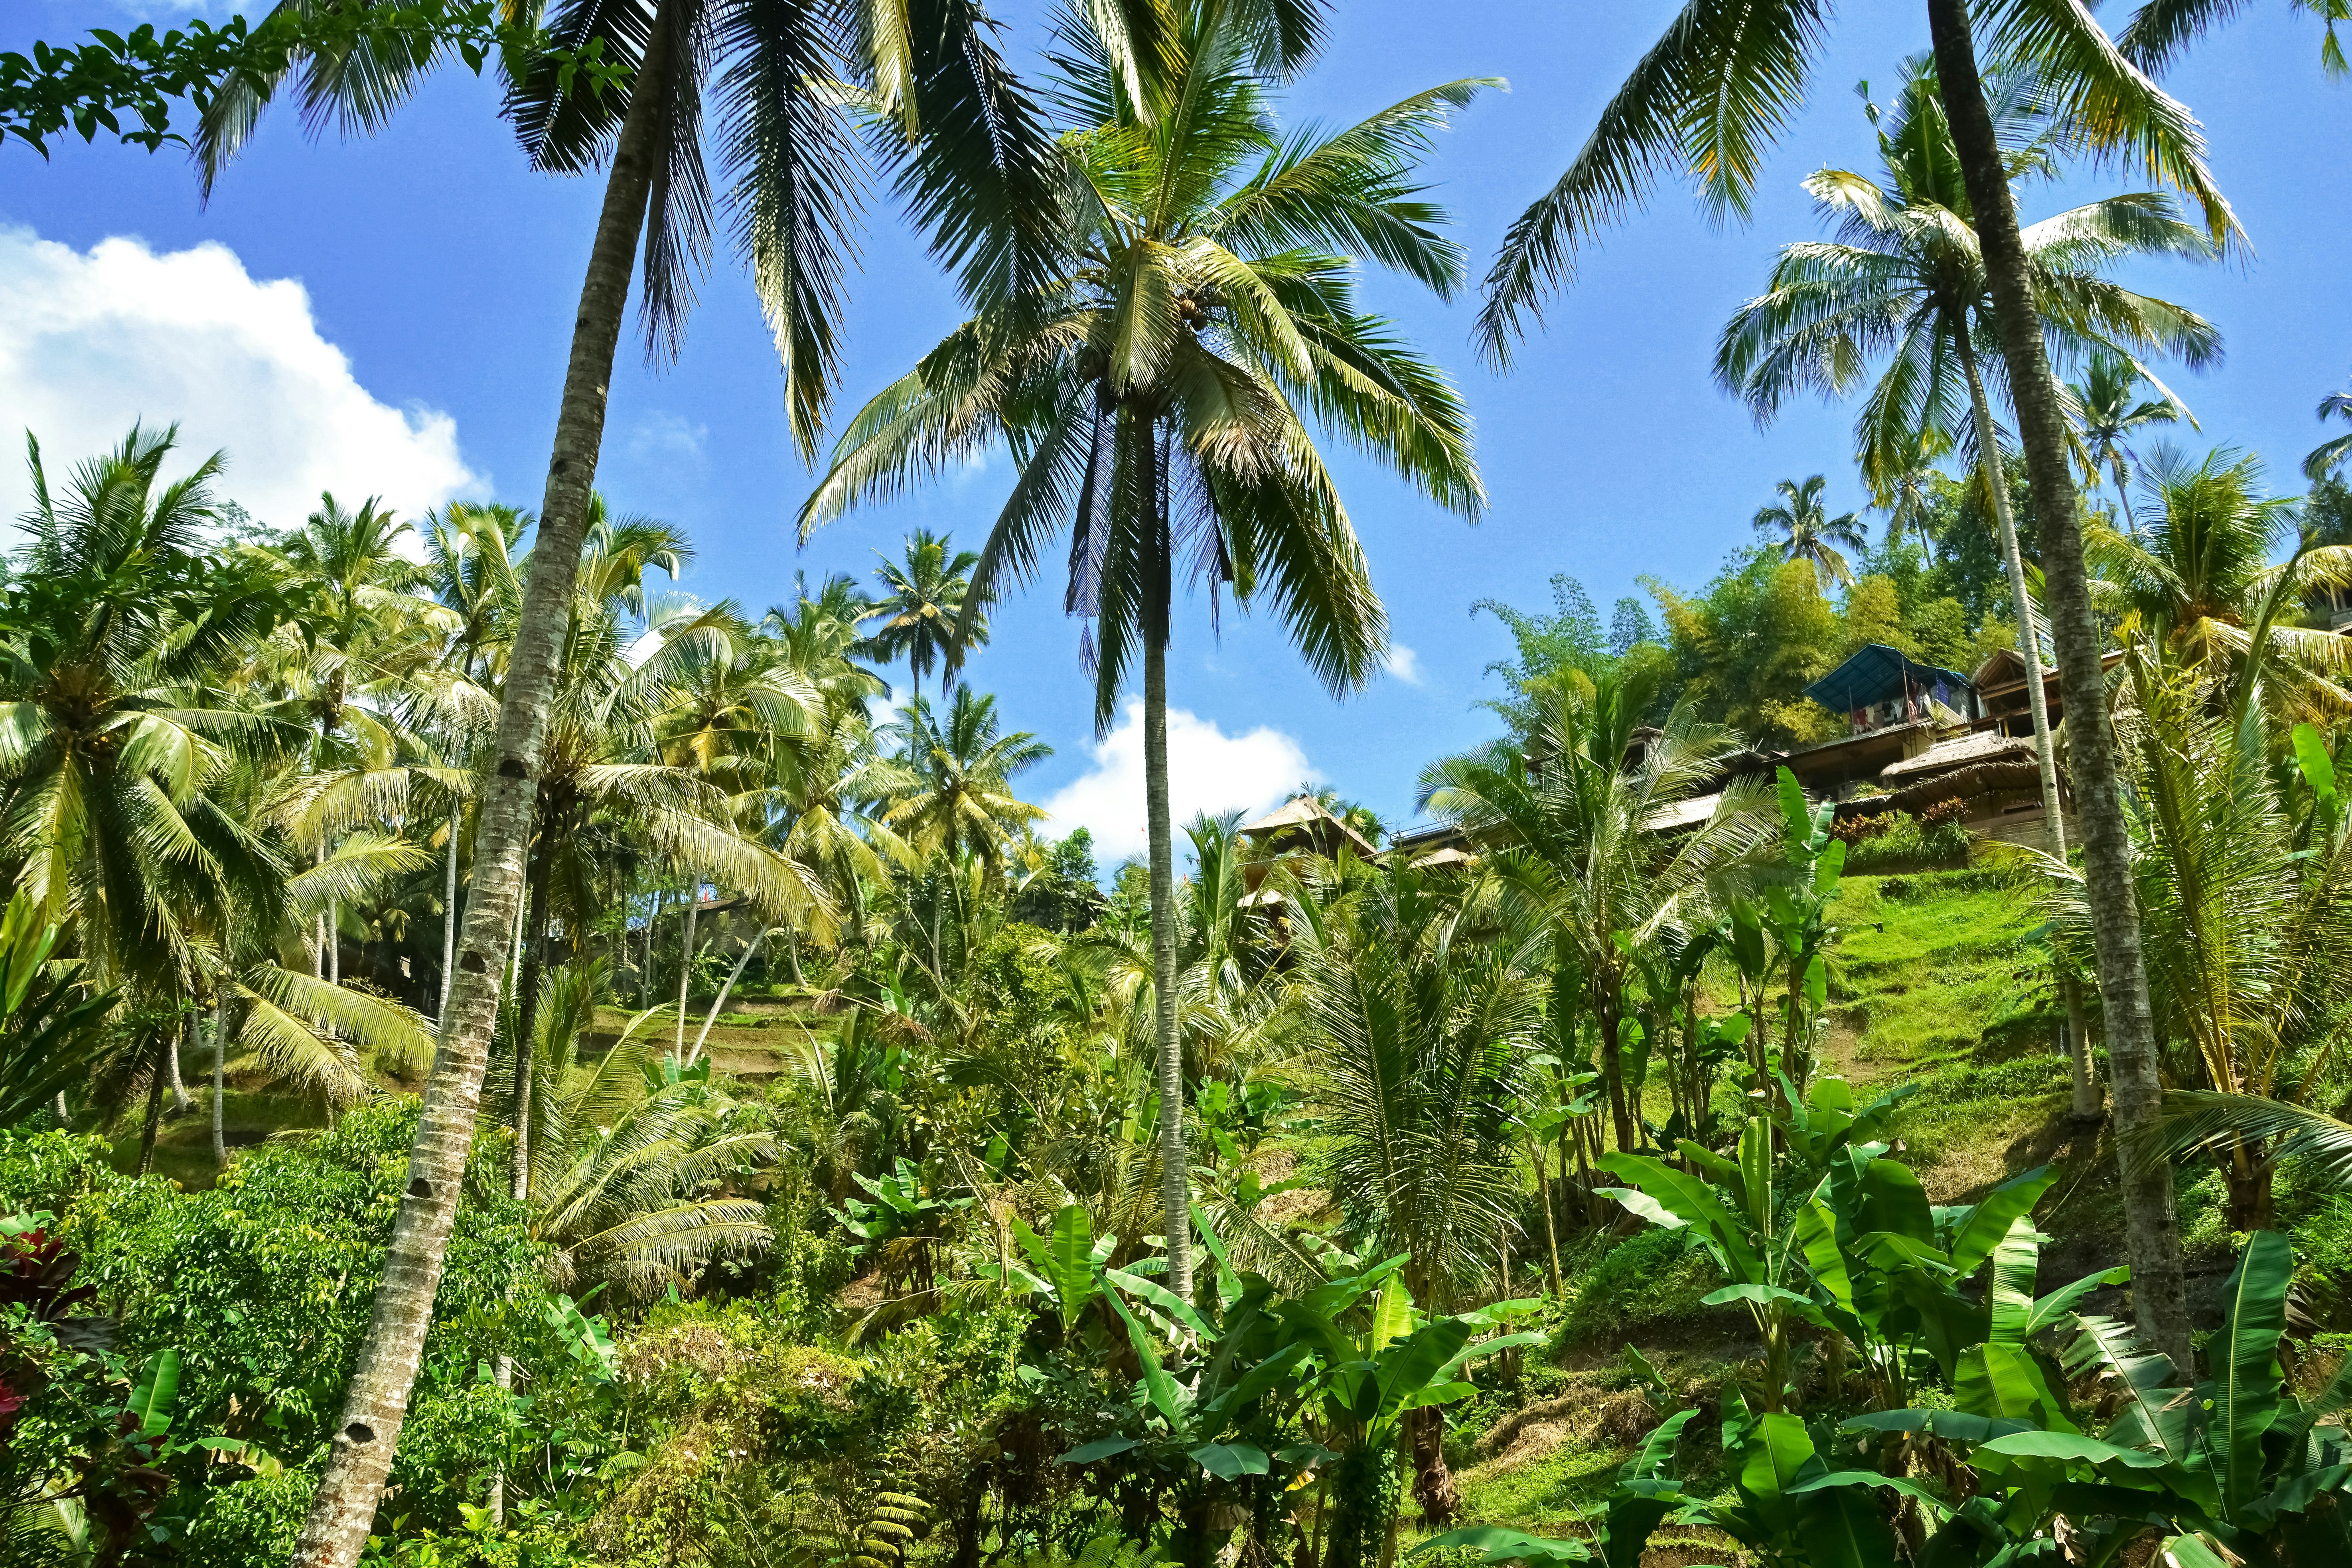 coconut trees near houses during daytime